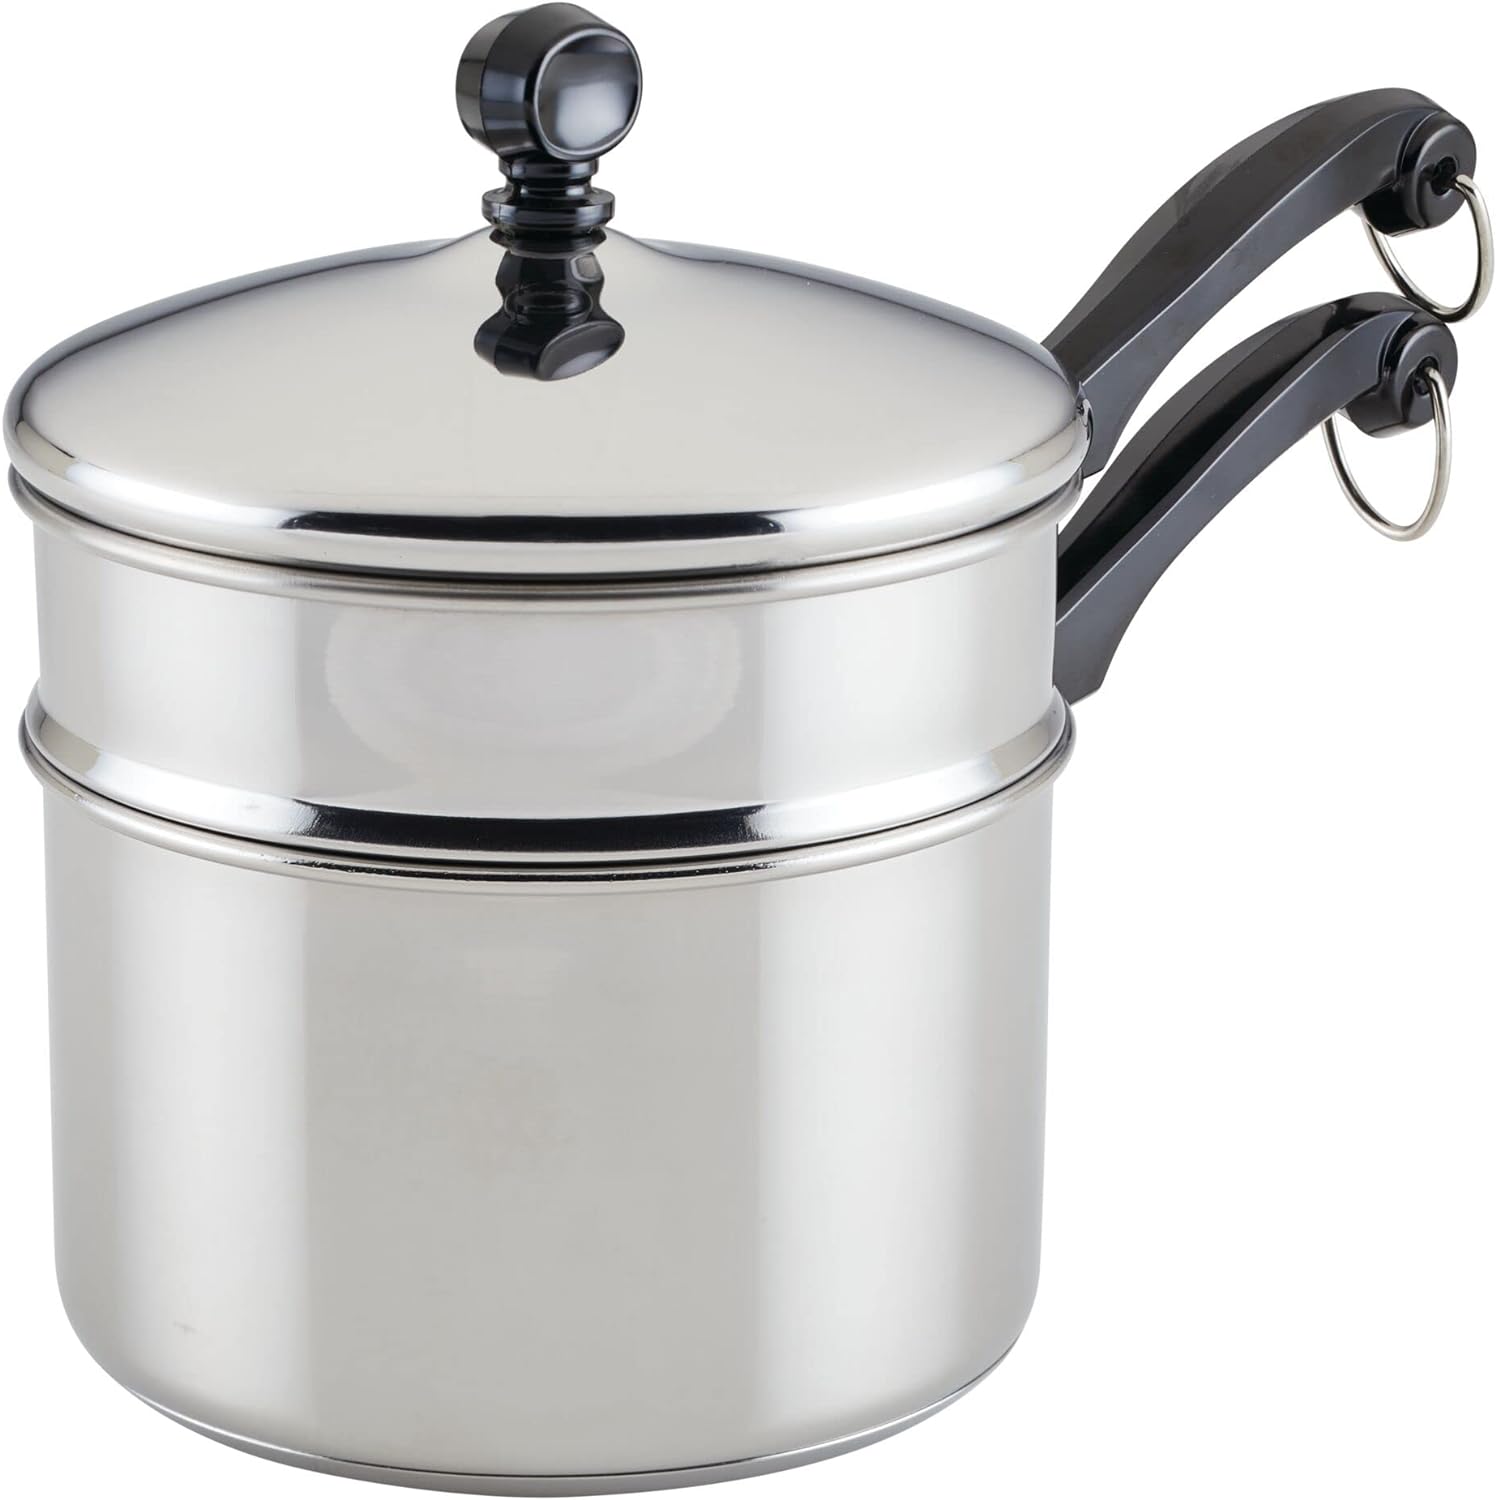 https://discounttoday.net/wp-content/uploads/2023/11/Farberware-Classic-Stainless-Series-2-Quart-Covered-Double-Boiler.jpg